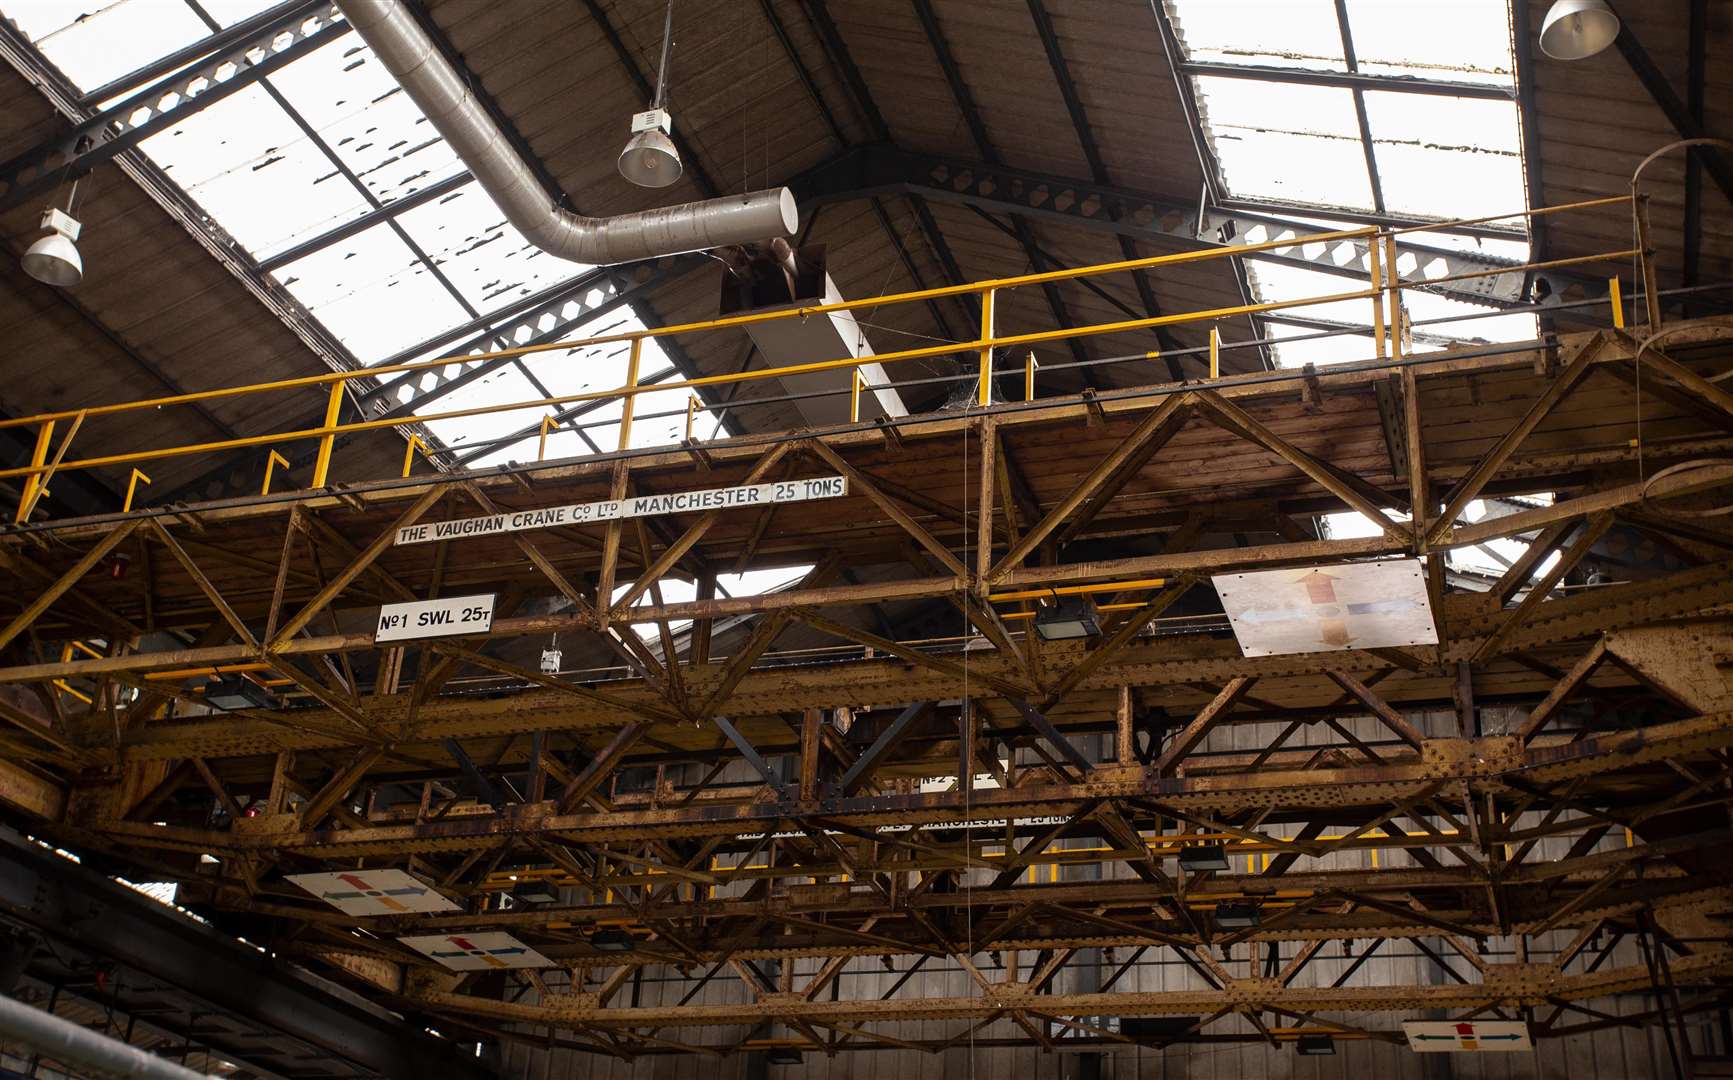 Overhead cranes were used to move wheelsets and bogies around the workshop